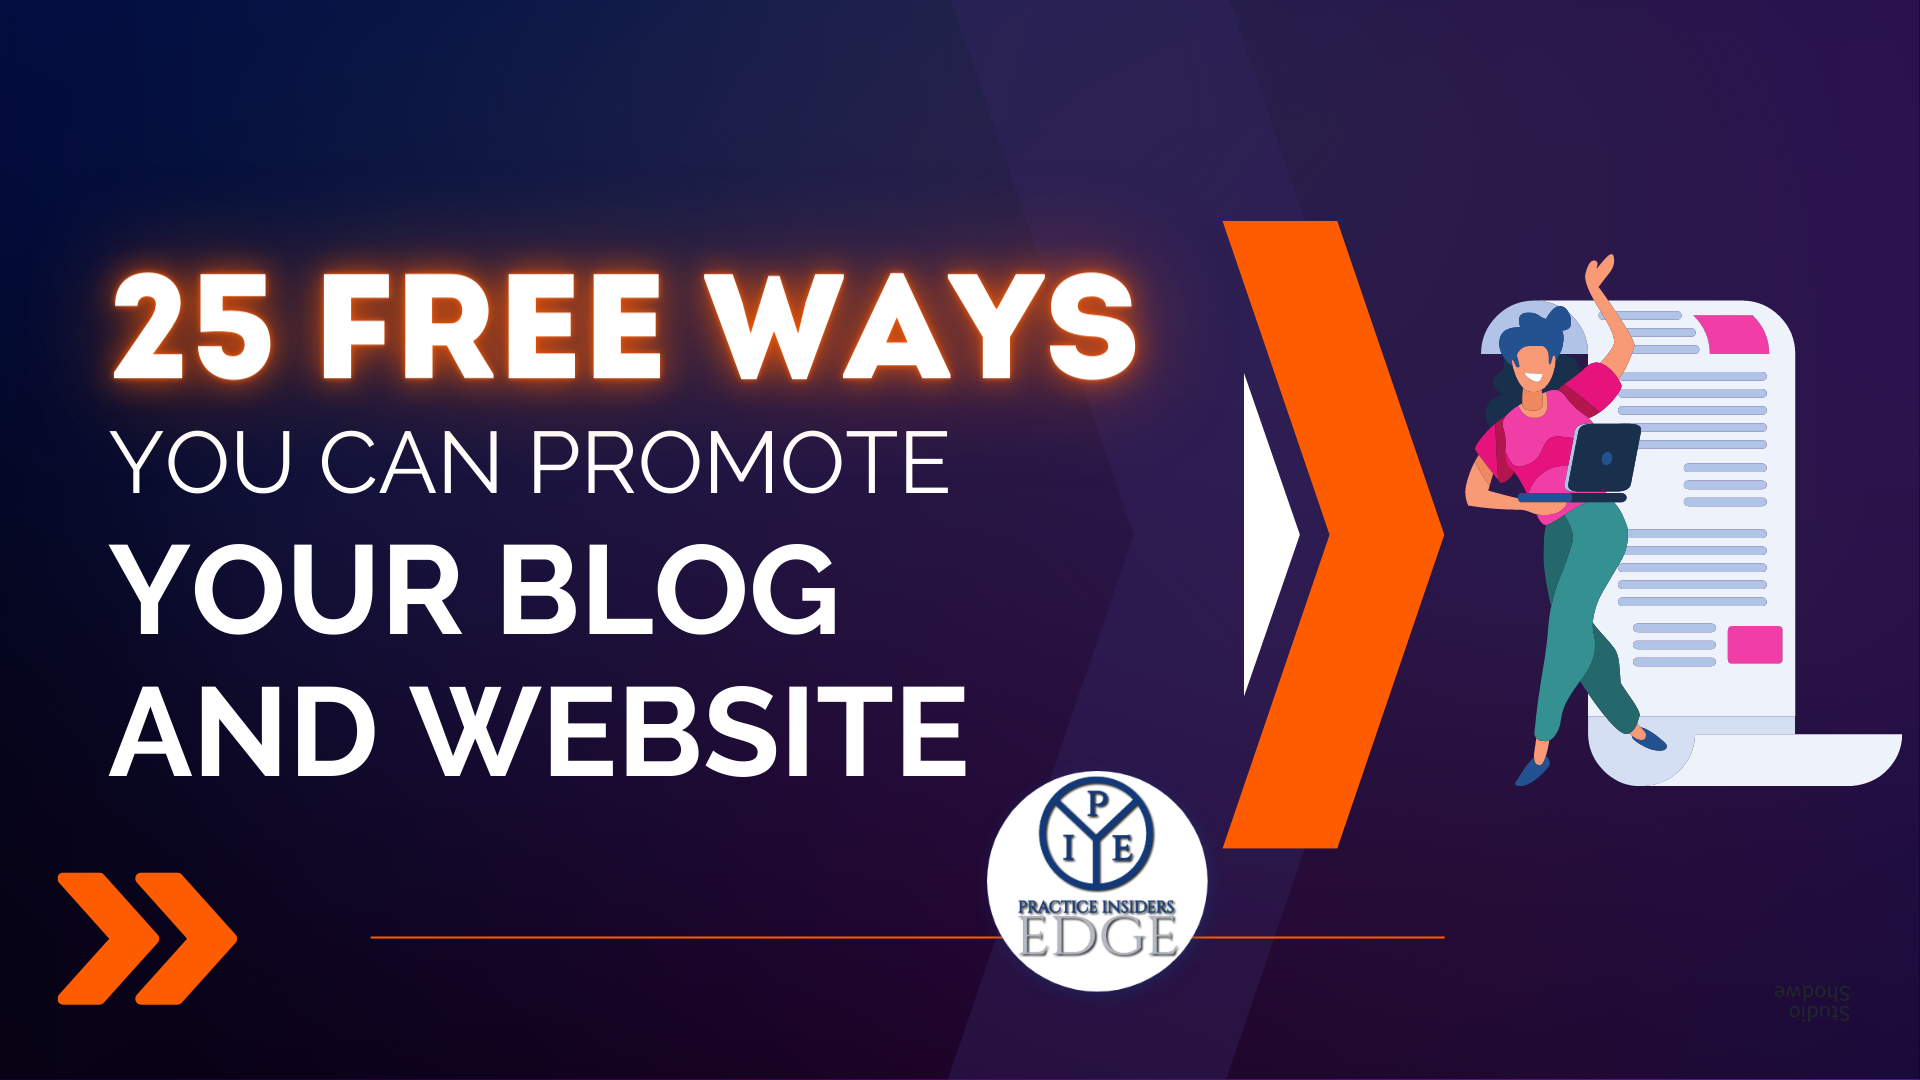 25 Free Ways You Can Promote Your Blog and Website